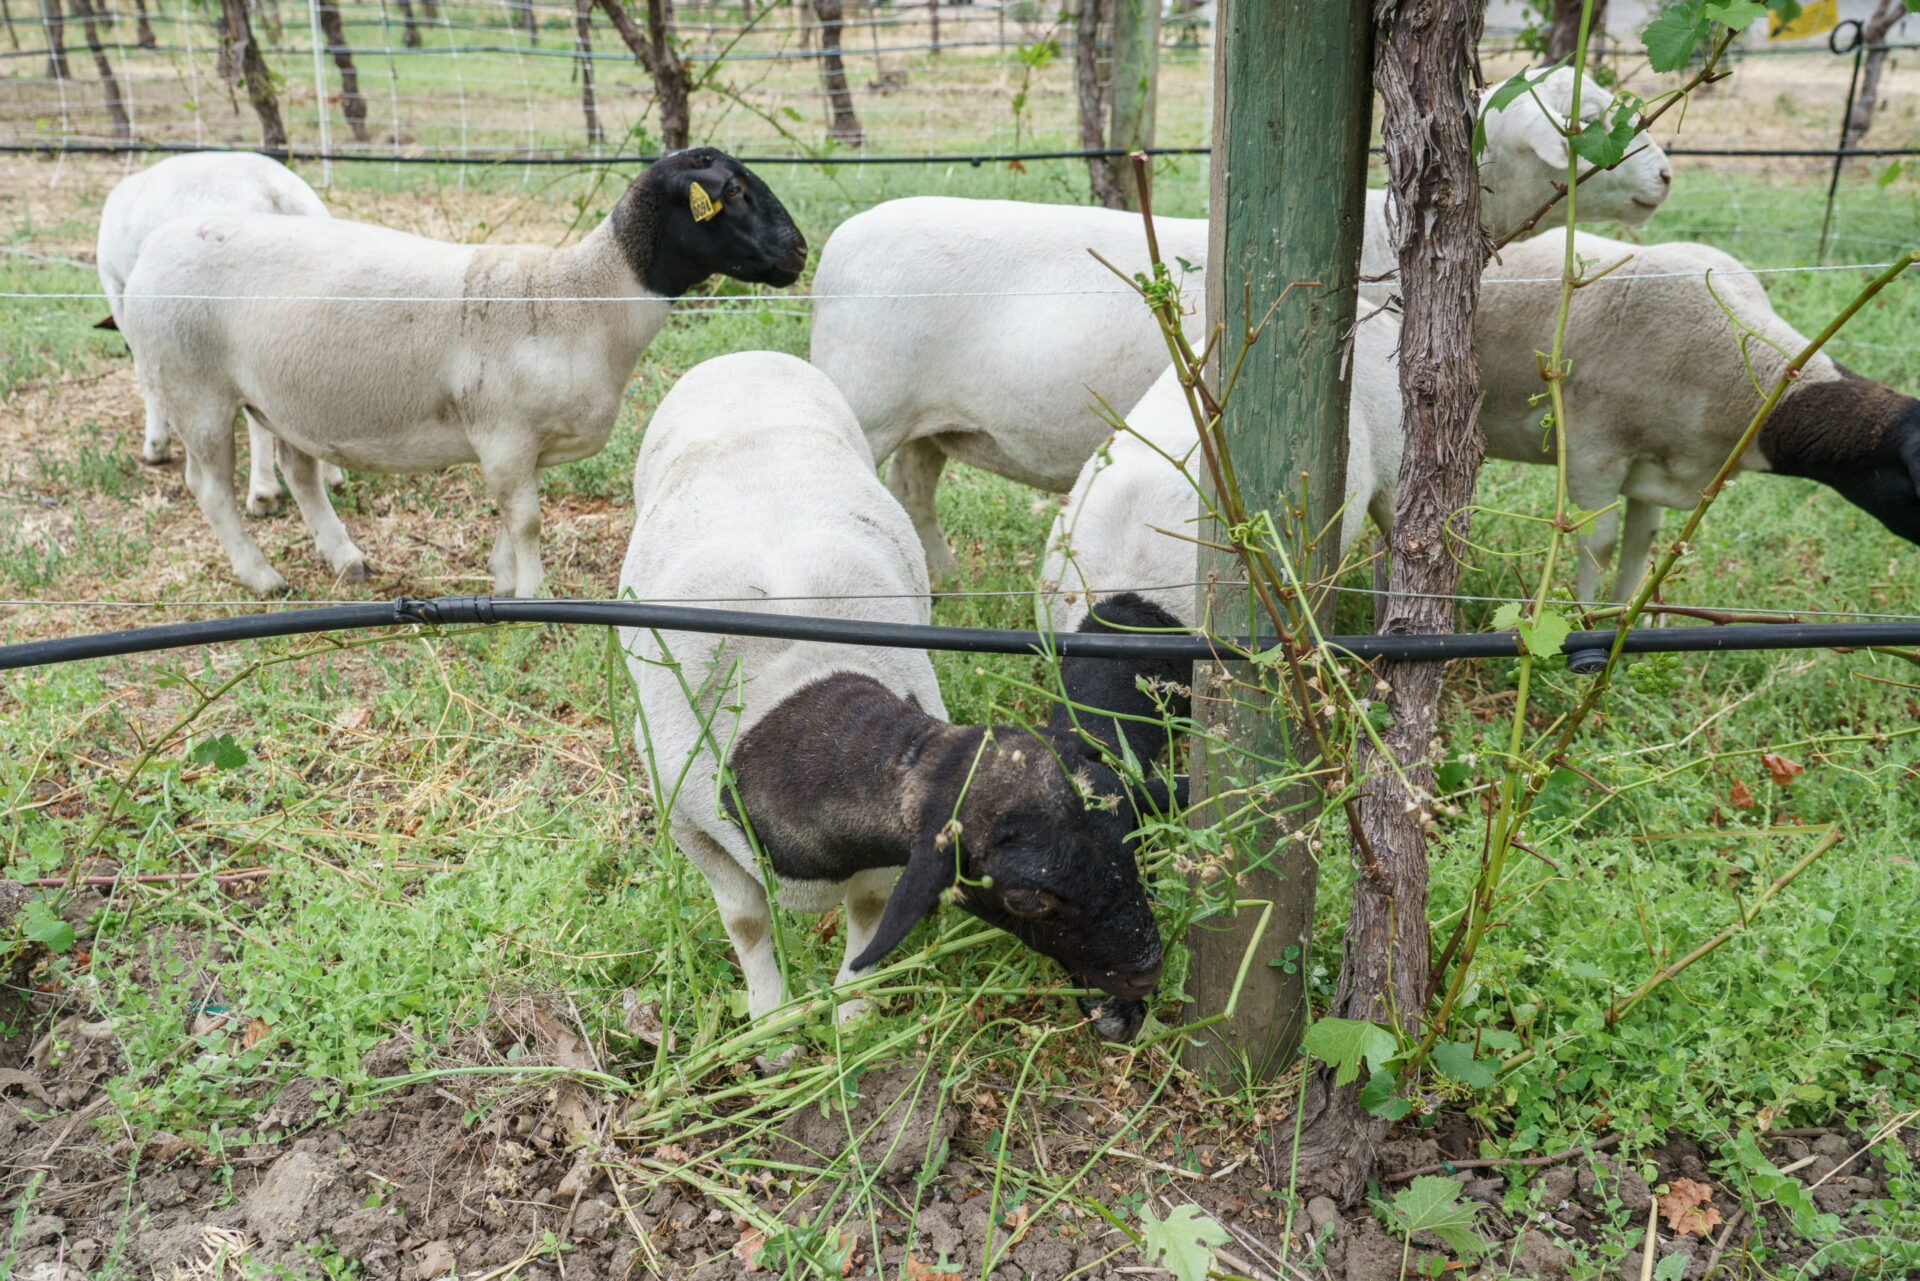 Sheep, natural grazers and fertilizers in the vineyard / Courtesy Jackson Family Wines